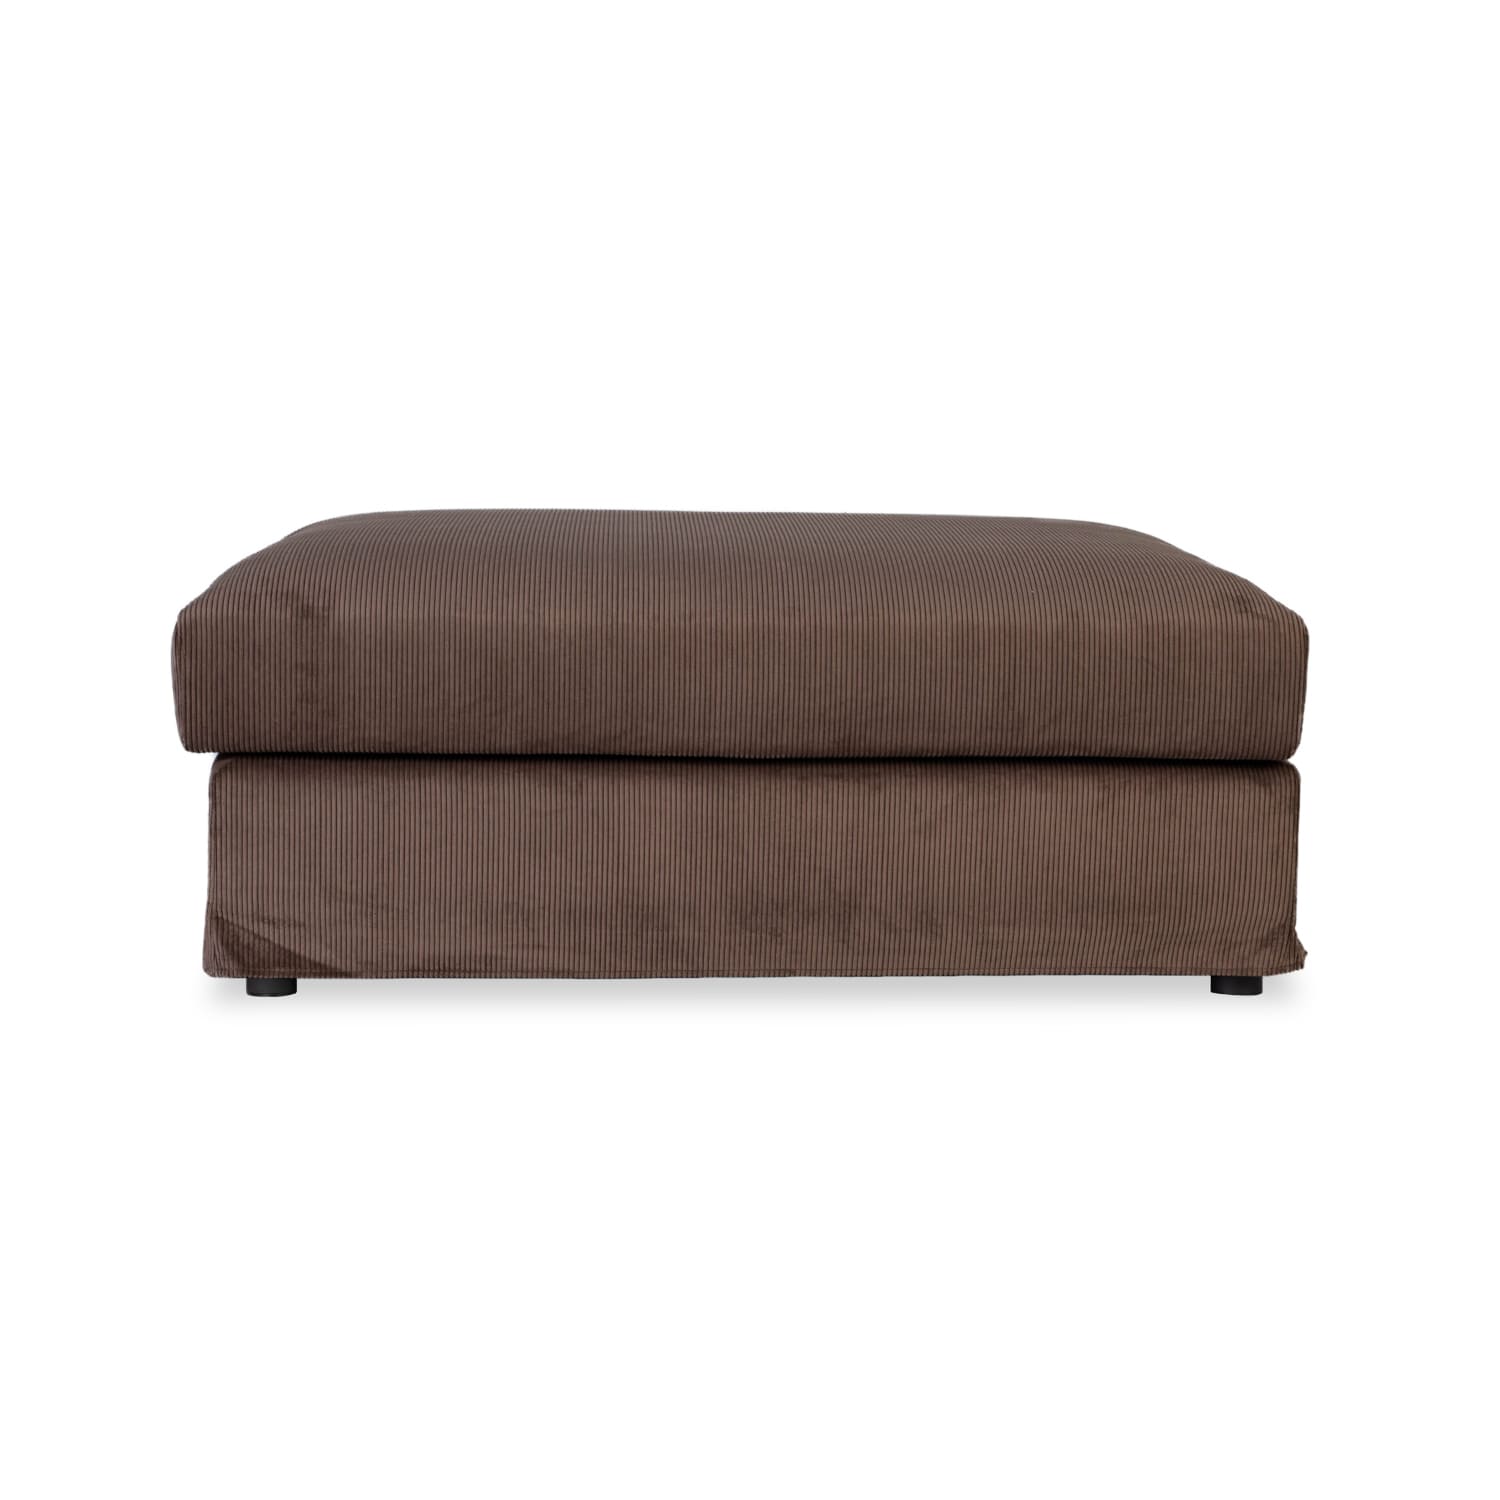 Imperfect Janson Extra Large Ottoman in Encore